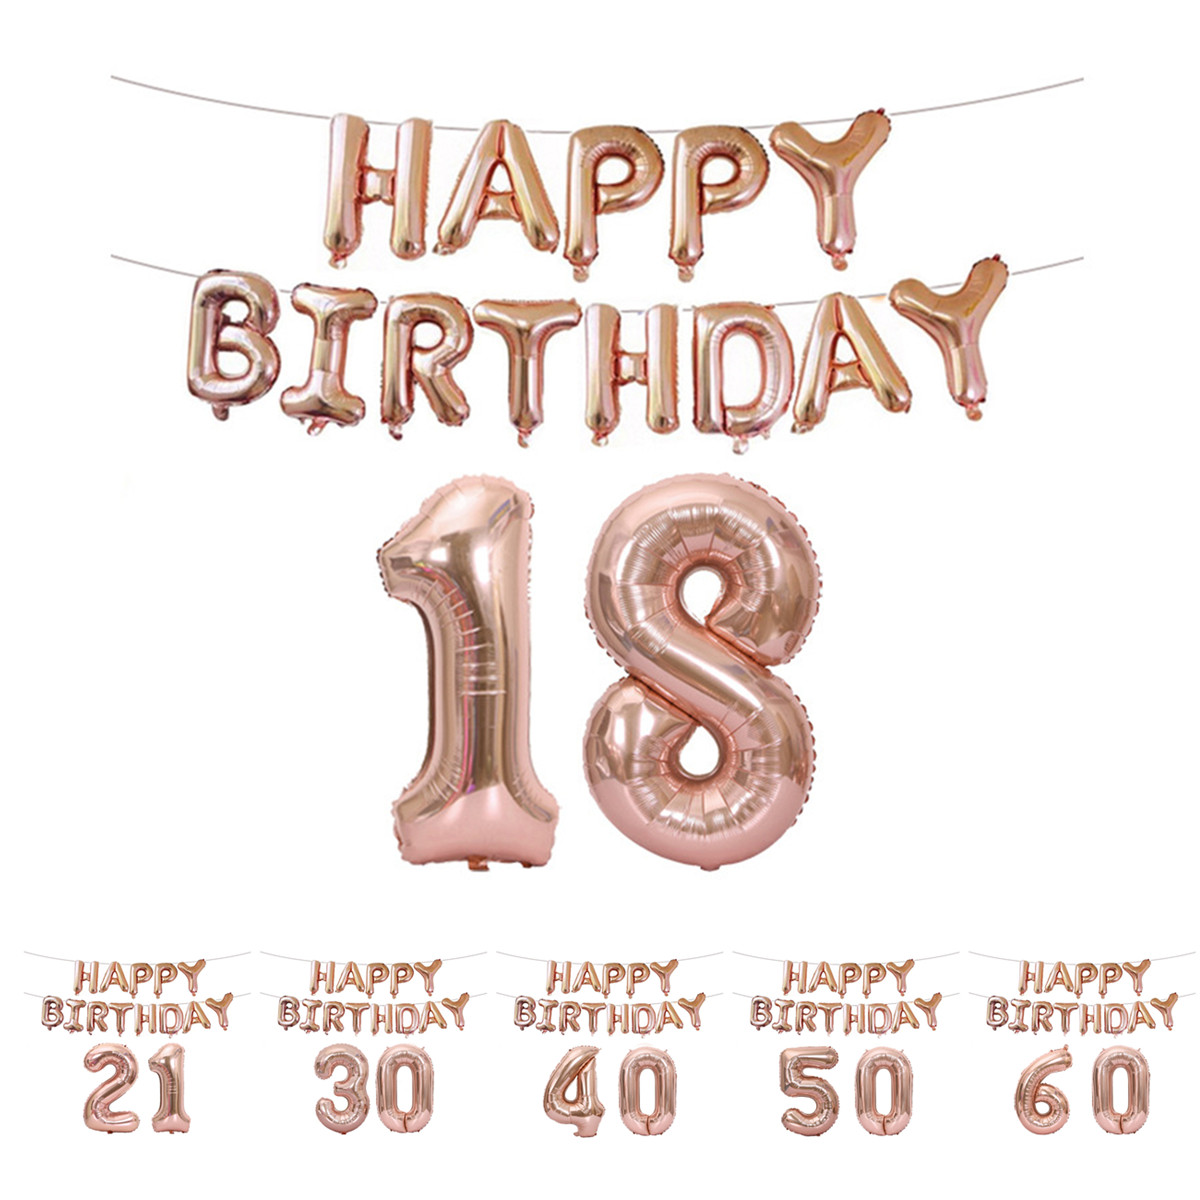 182130405060th-Rose-Gold-Happy-Birthday-Foil-Balloon-Banner-Kit-Party-Decorations-1456819-2